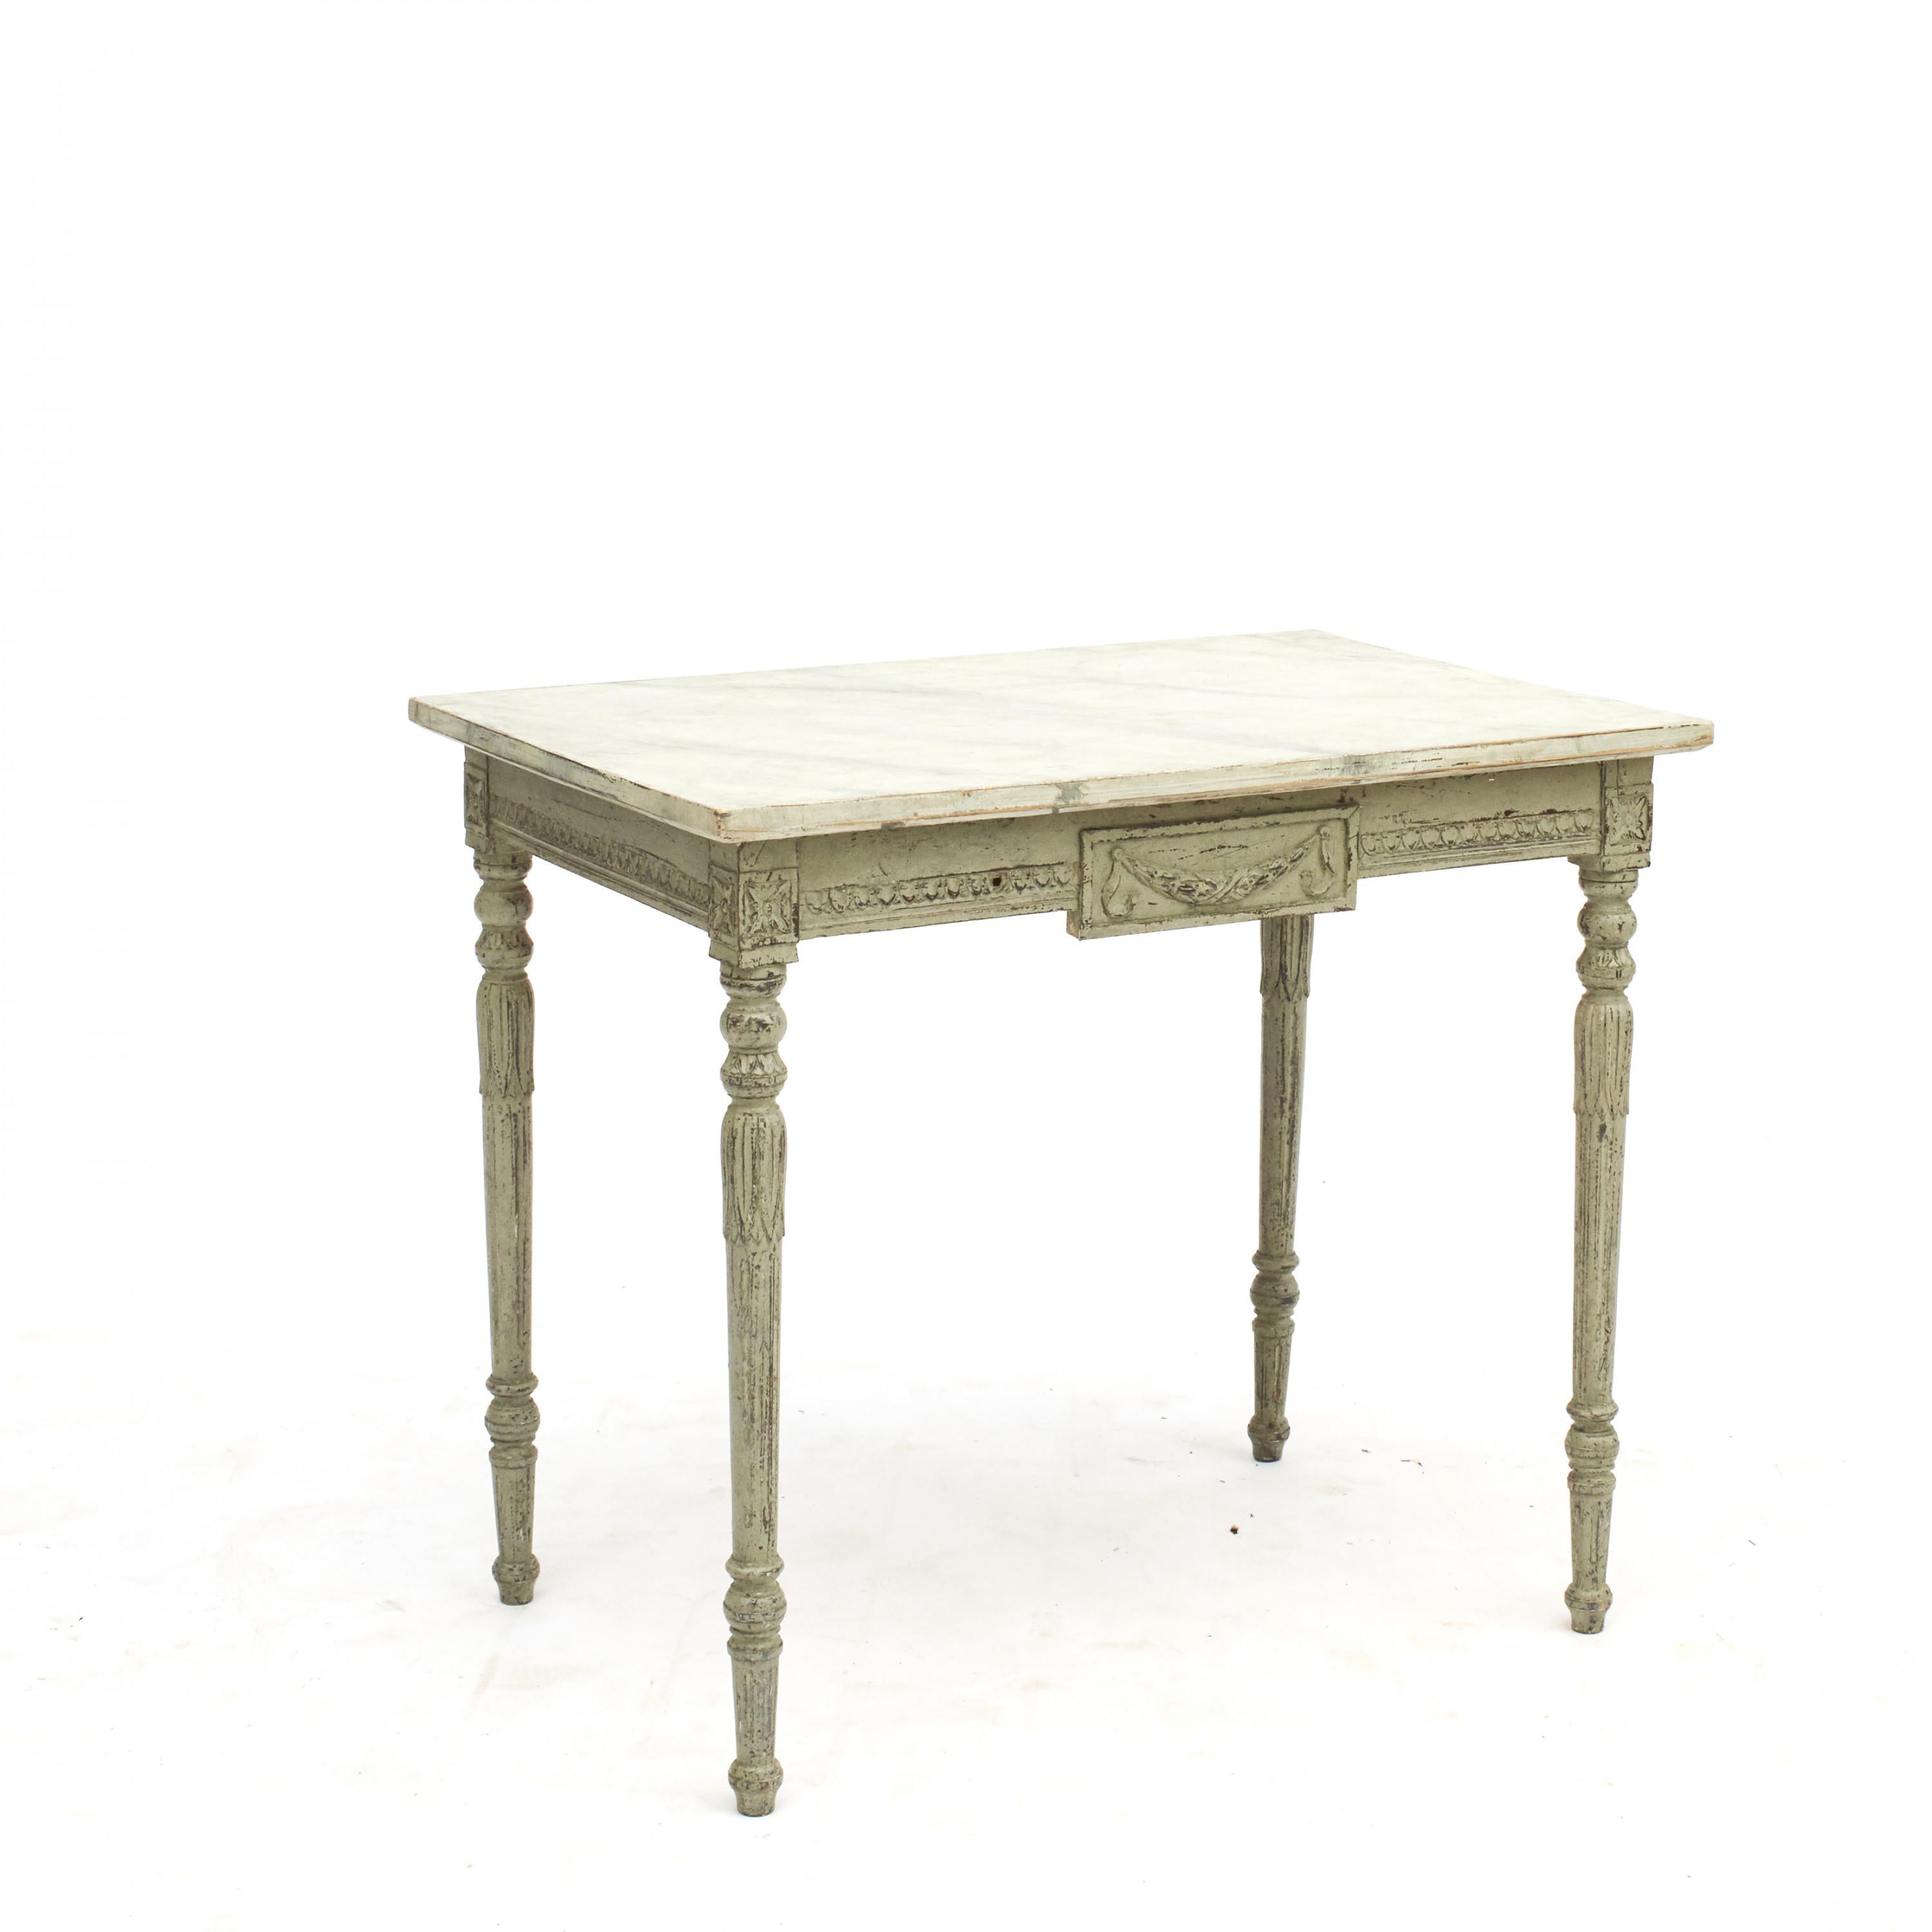 A small and elegant Gustavian style freestanding painted side table on tapered fluted legs.
Richly carved, with faux painted marble top.
Painted and decorated in soft Scandinavian colors with a lovely distressed painted finish.

Sweden /